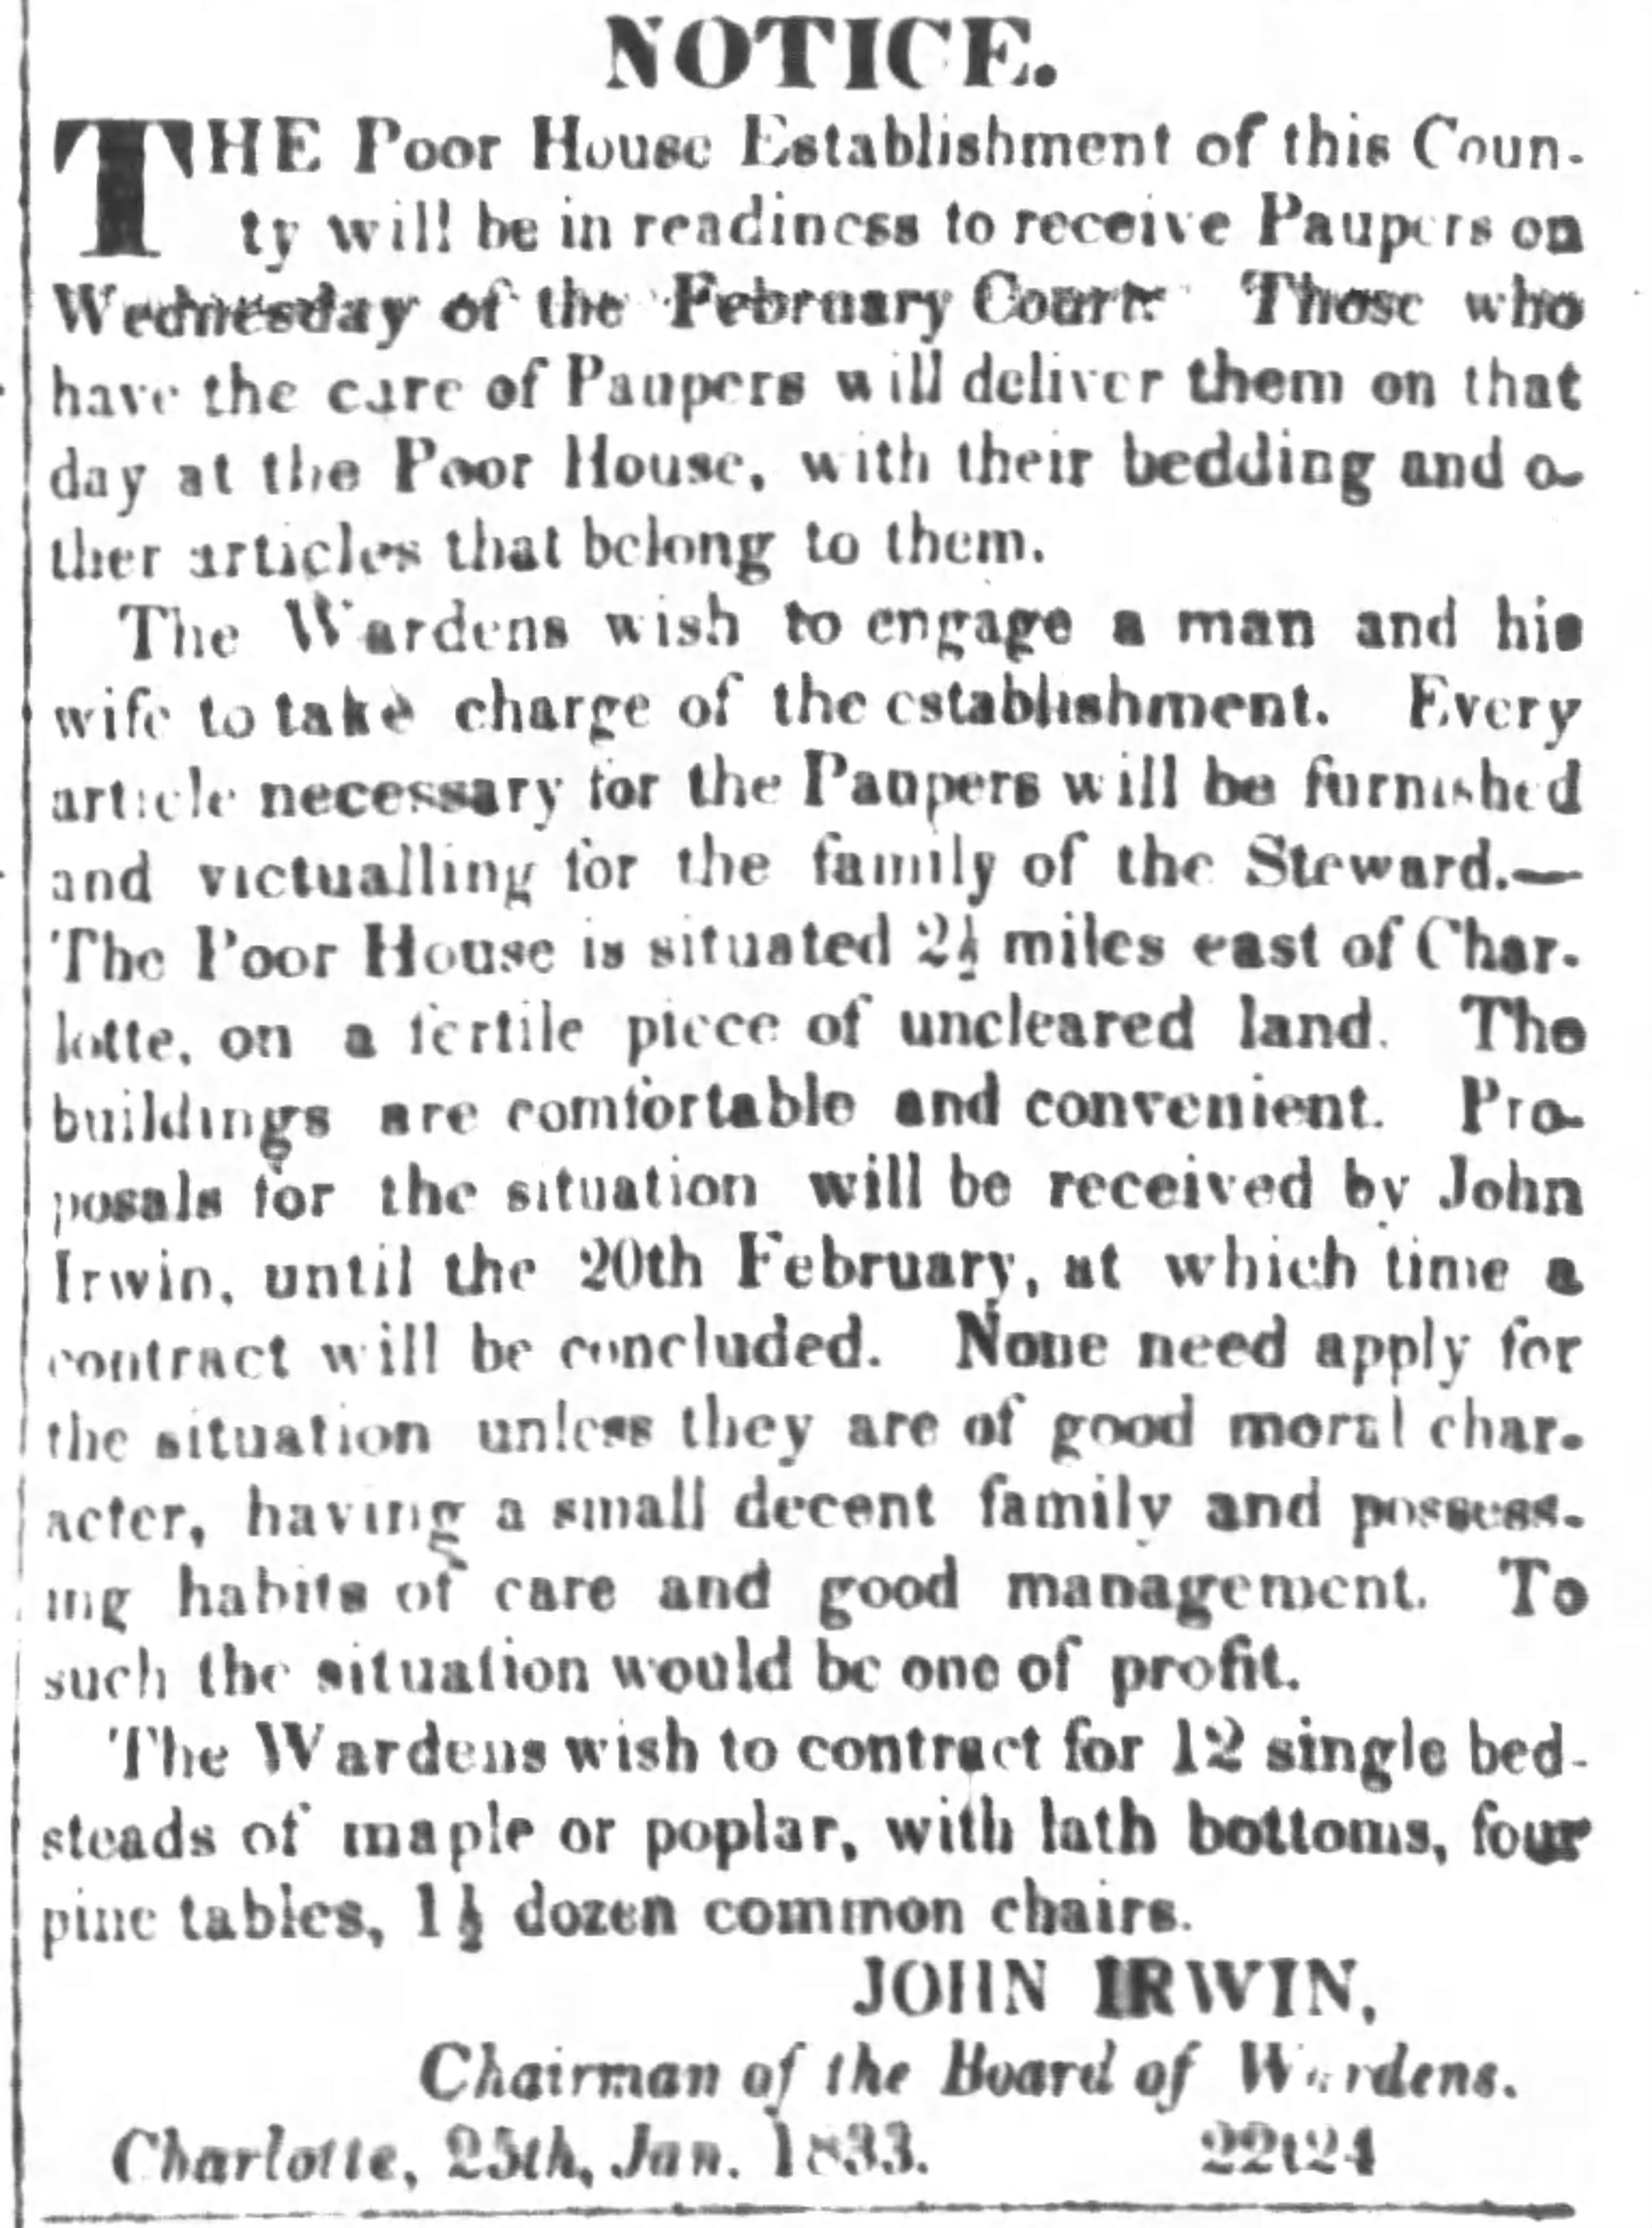 Miners' and Farmers' Journal, January 26, 1833, p.3